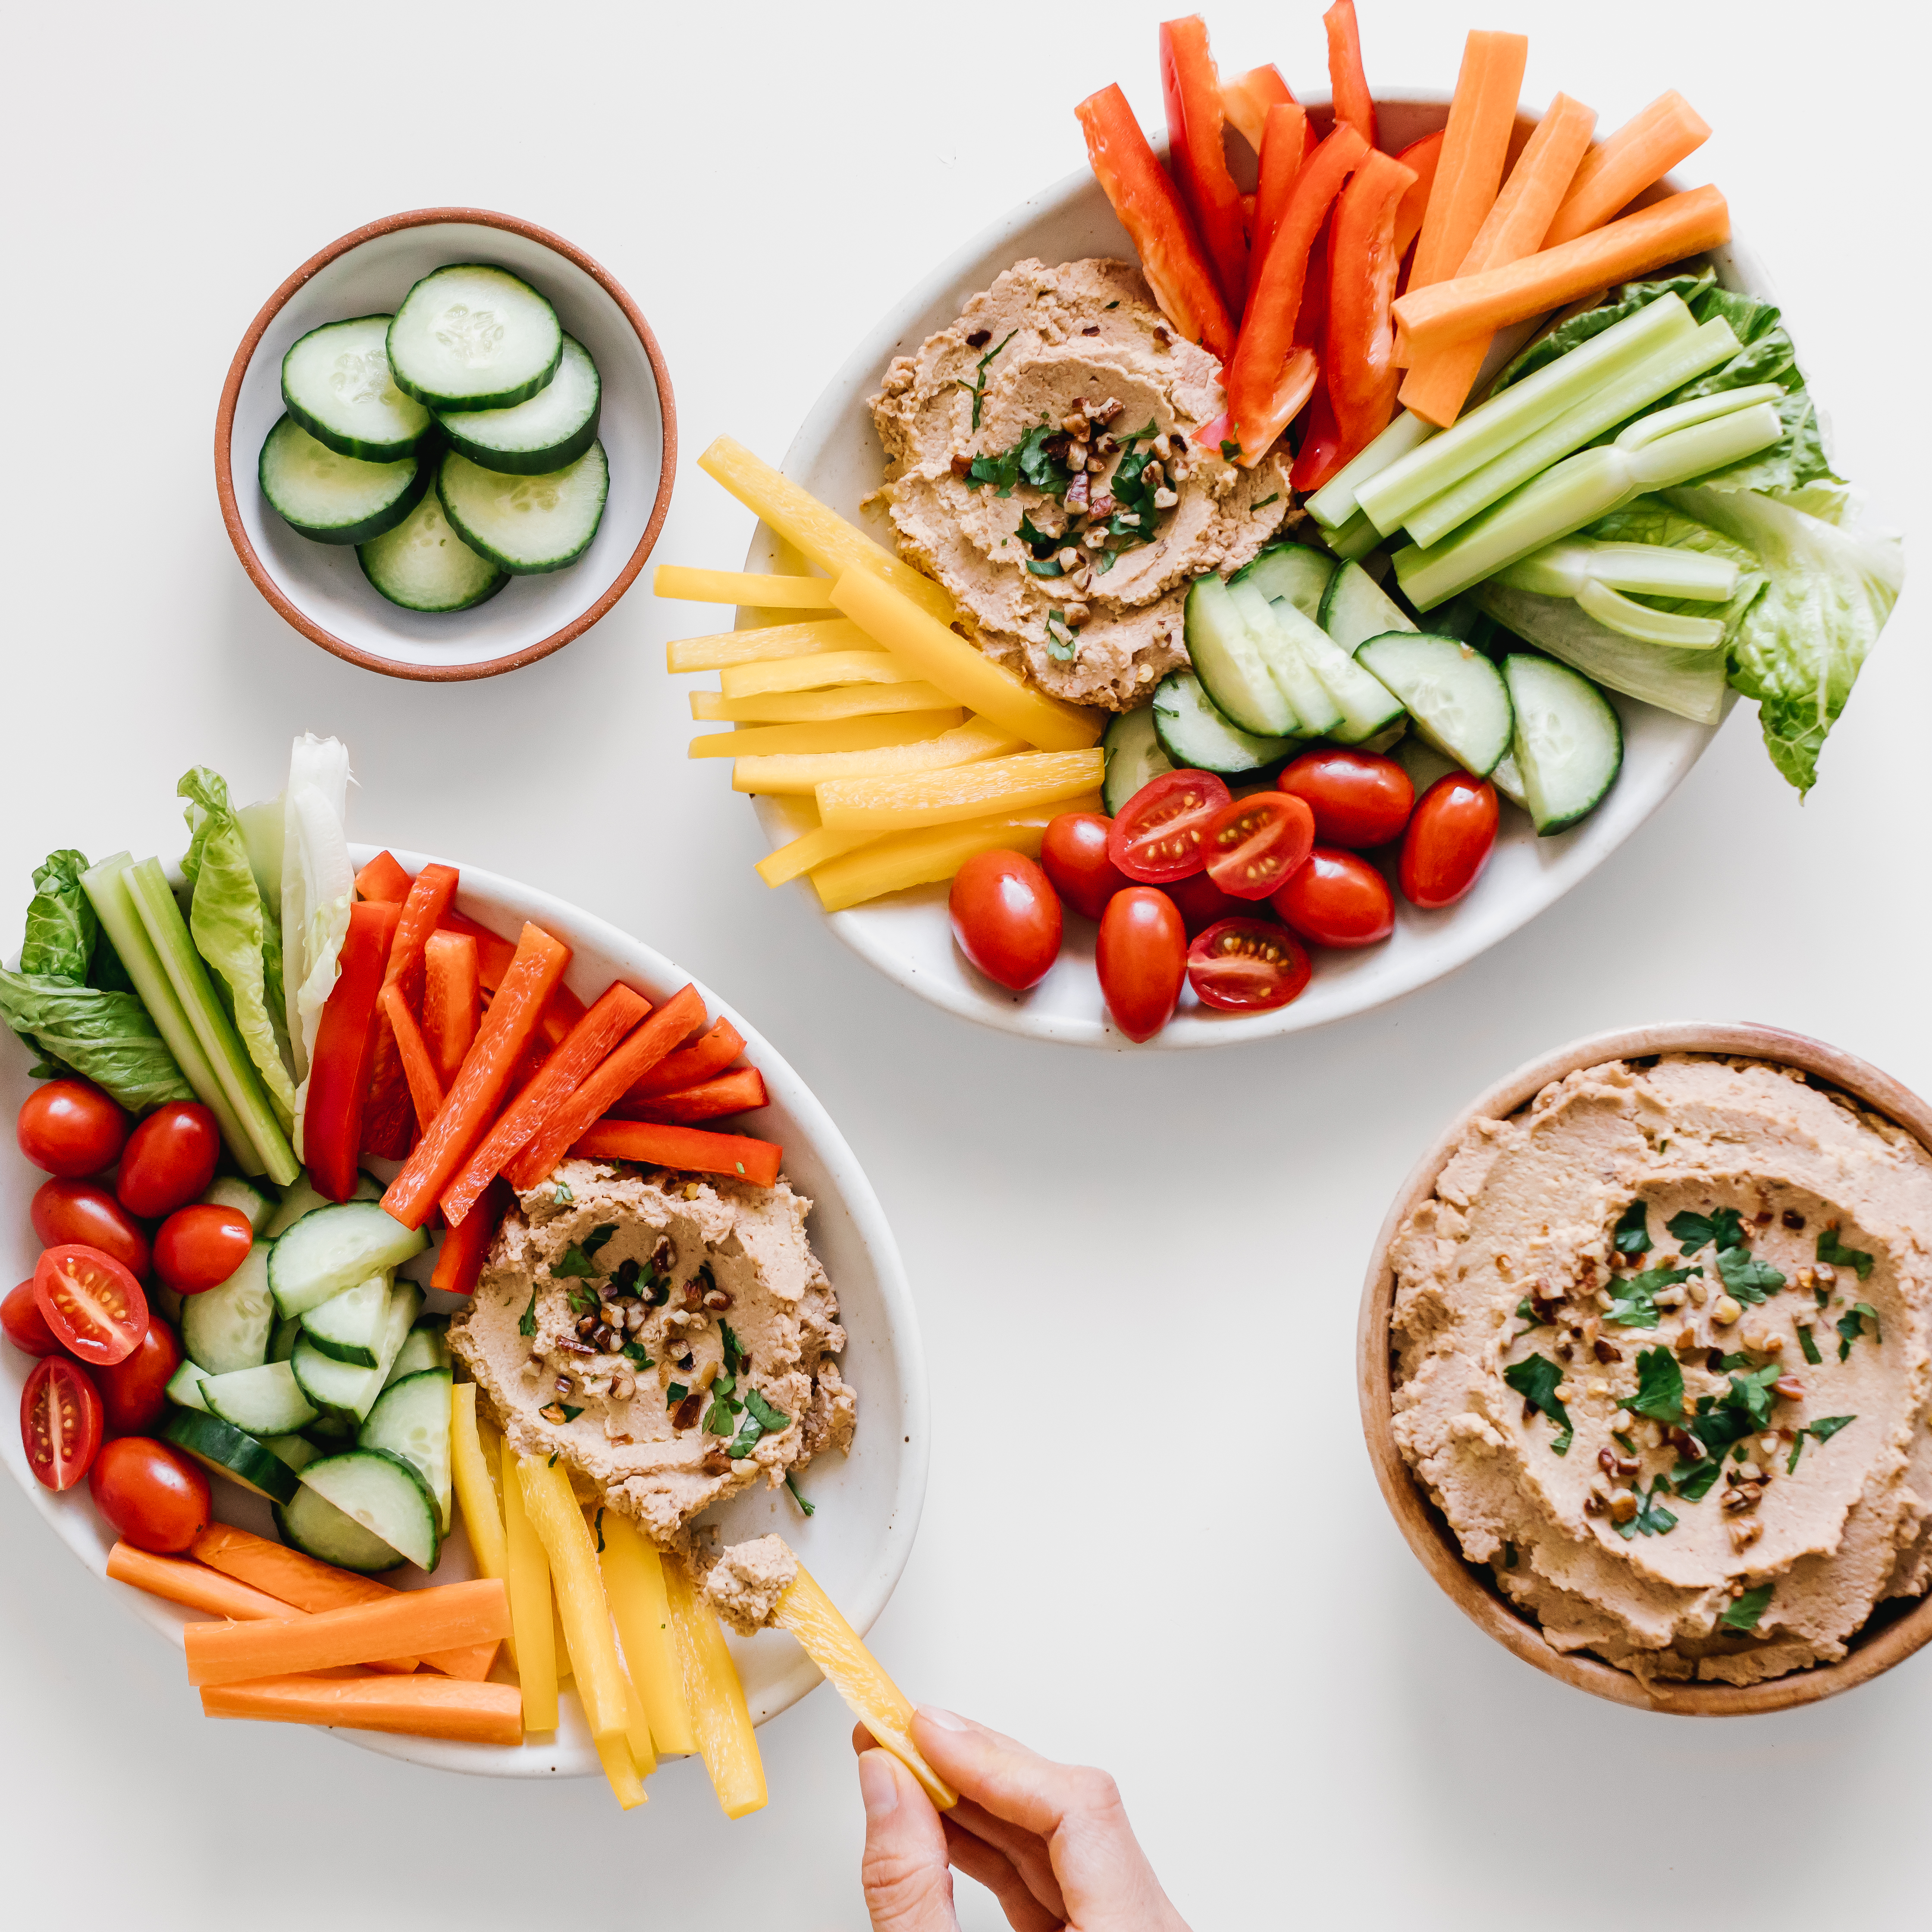 This smoky pecan dip makes for a simple vegetarian snack that comes together in less than 30 minutes! Dad will love how the dip balances and enhances the veggies!